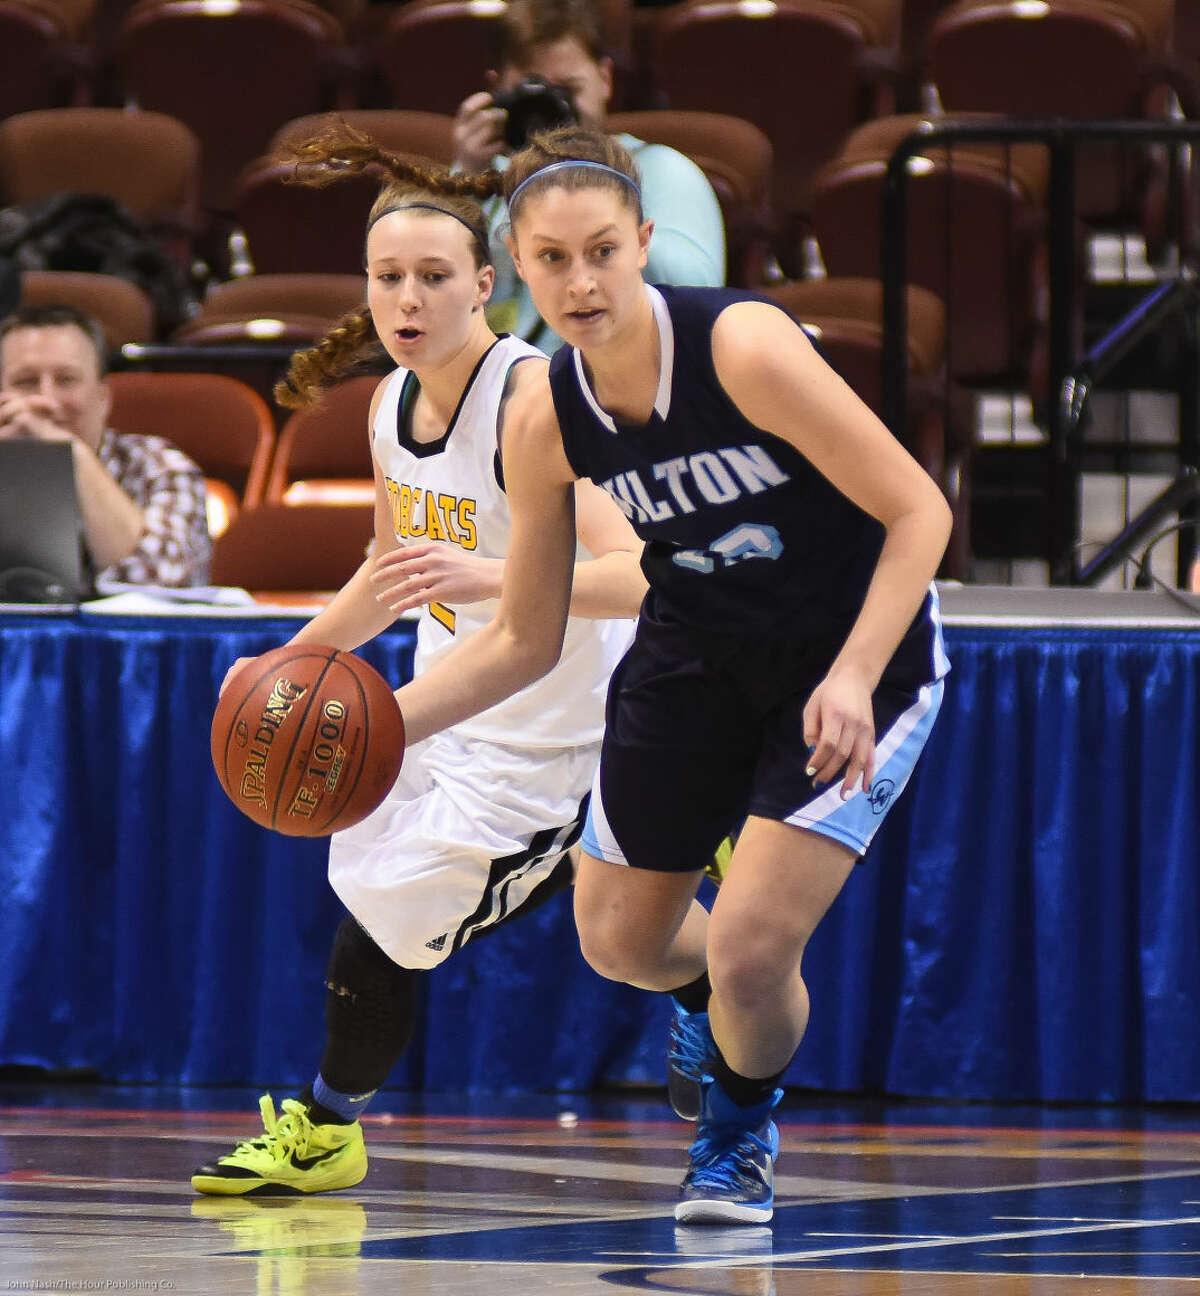 Hour photo/John Nash - Action from Saturday's CIAC Class LL girls basketball championship game between Wilton and South Windsor.